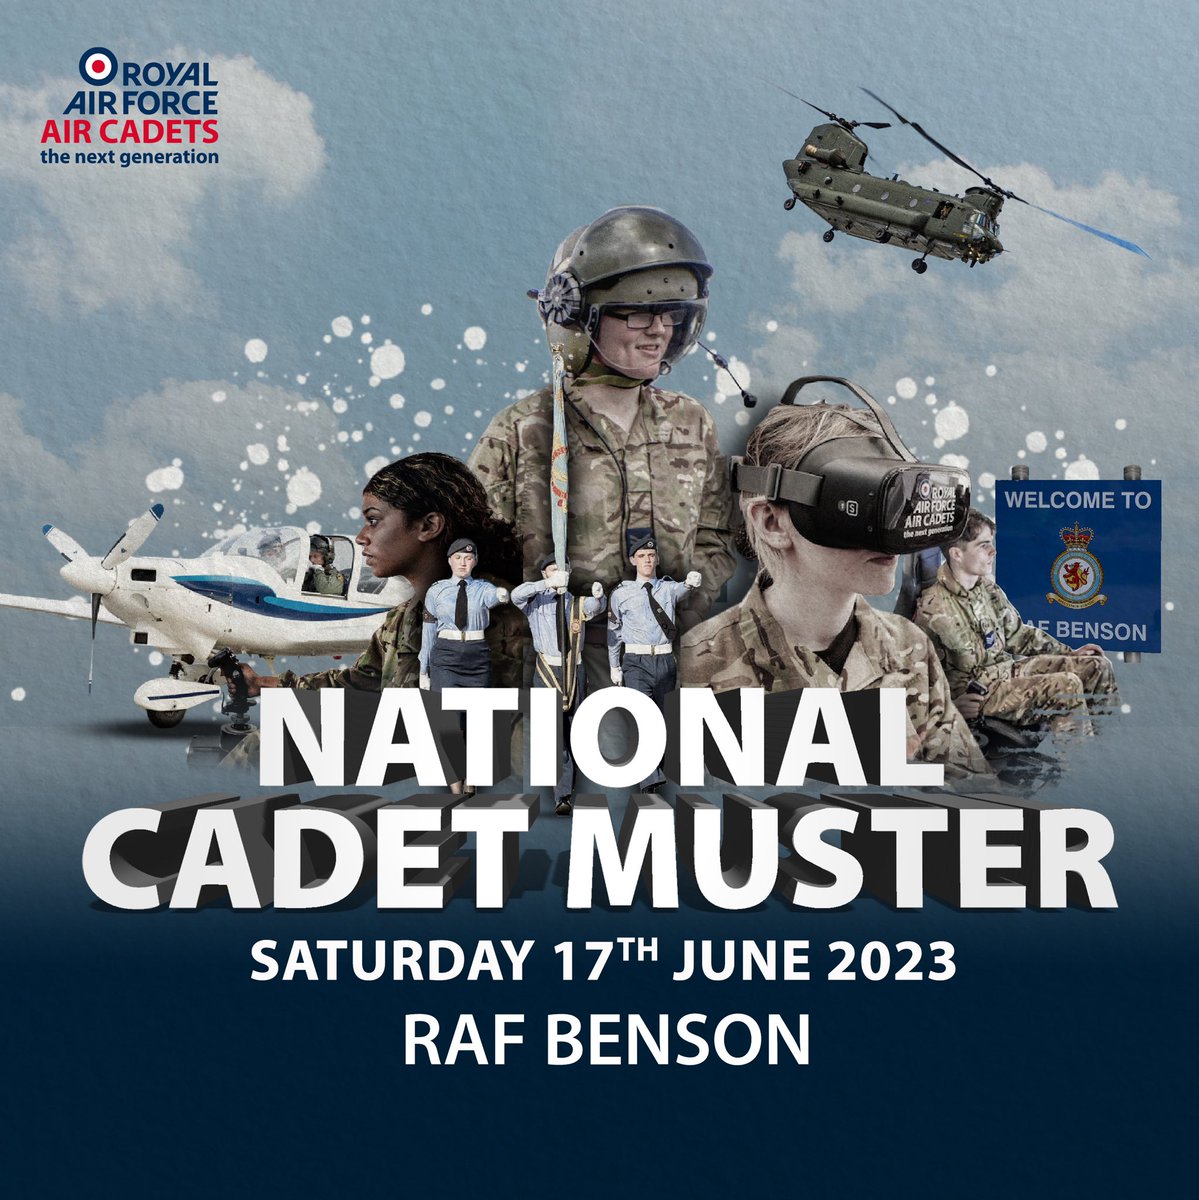 Attention Cadets! Don't miss out on this year's muster at RAF Benson on June 17th! Bid now on Cadet Portal for your chance to participate in Air Experience Flying and interactive RAFAC activities. Contact your Squadron staff for details. #RAFAC #rafacmuster23 #aircadets'